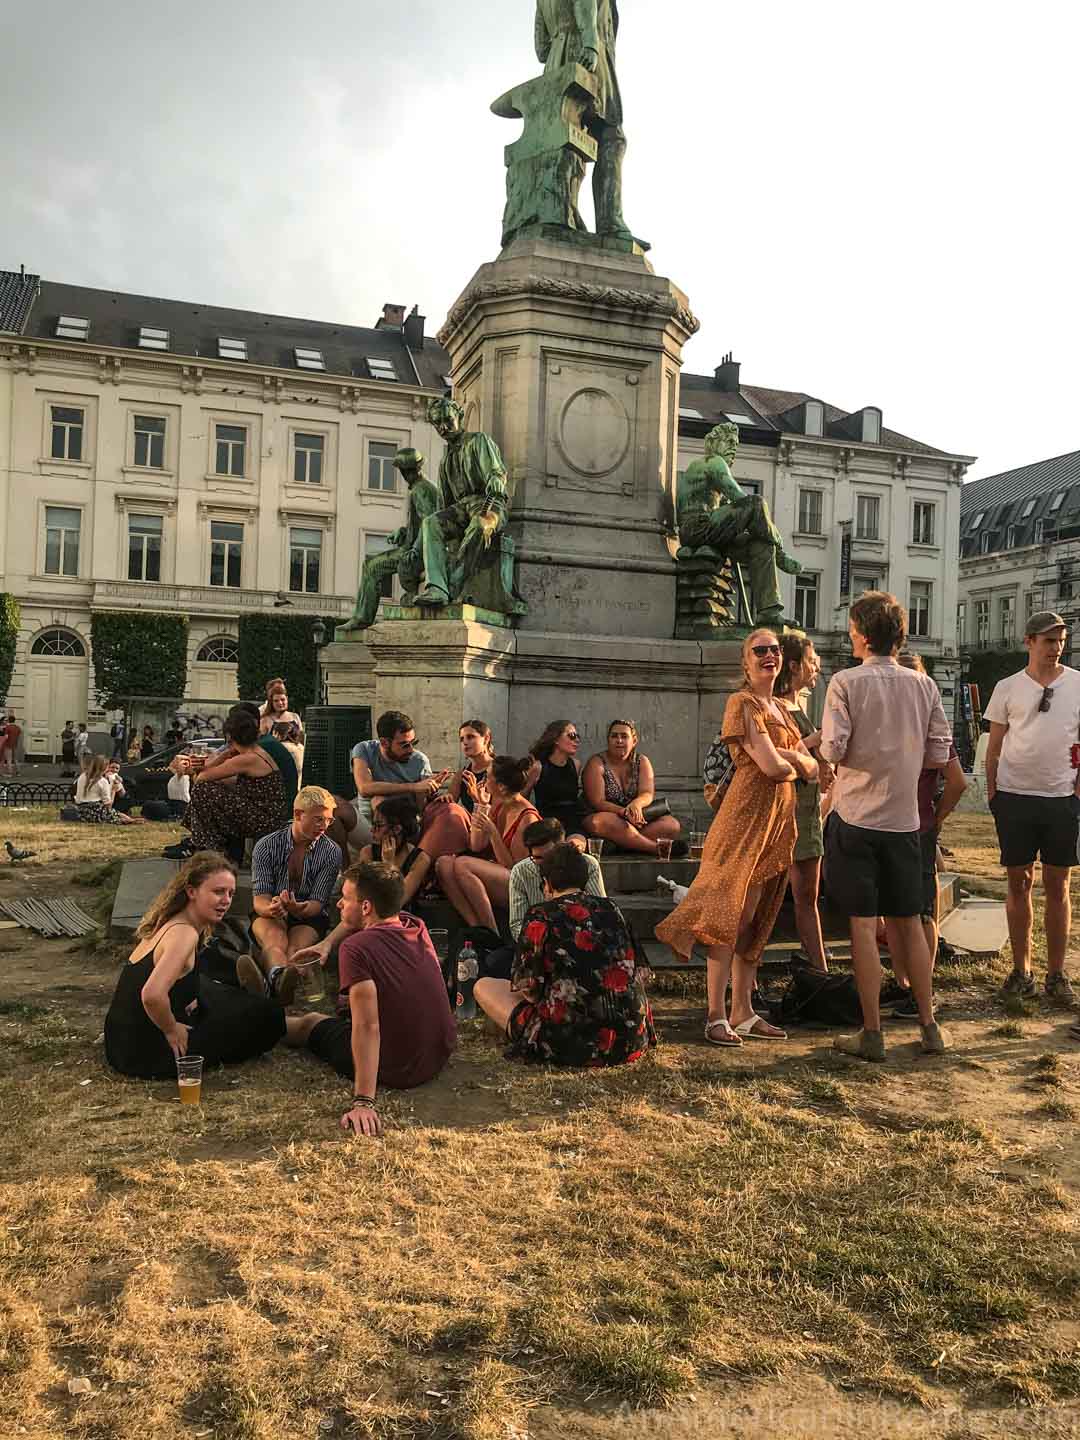 people around a statue at place du luxembourg brussels